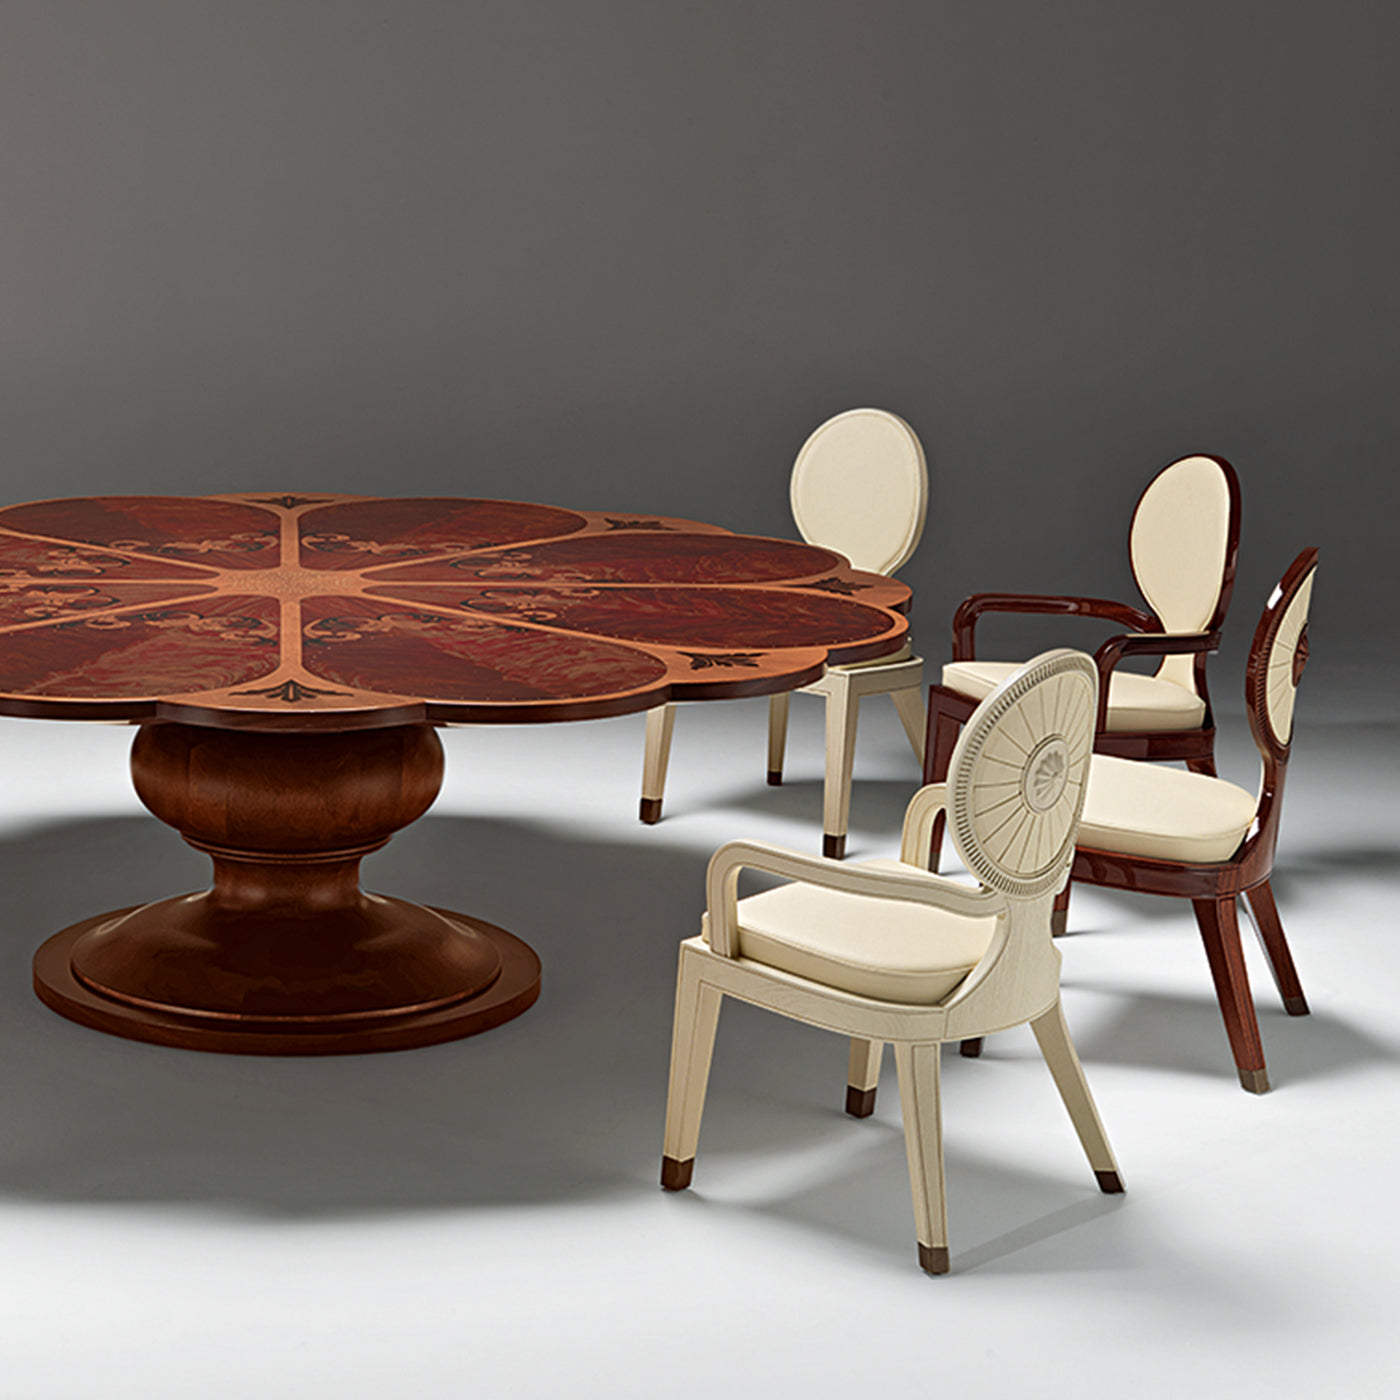 Red Sun Dining Chair by Archer Humphryes Architects - Alternative view 4